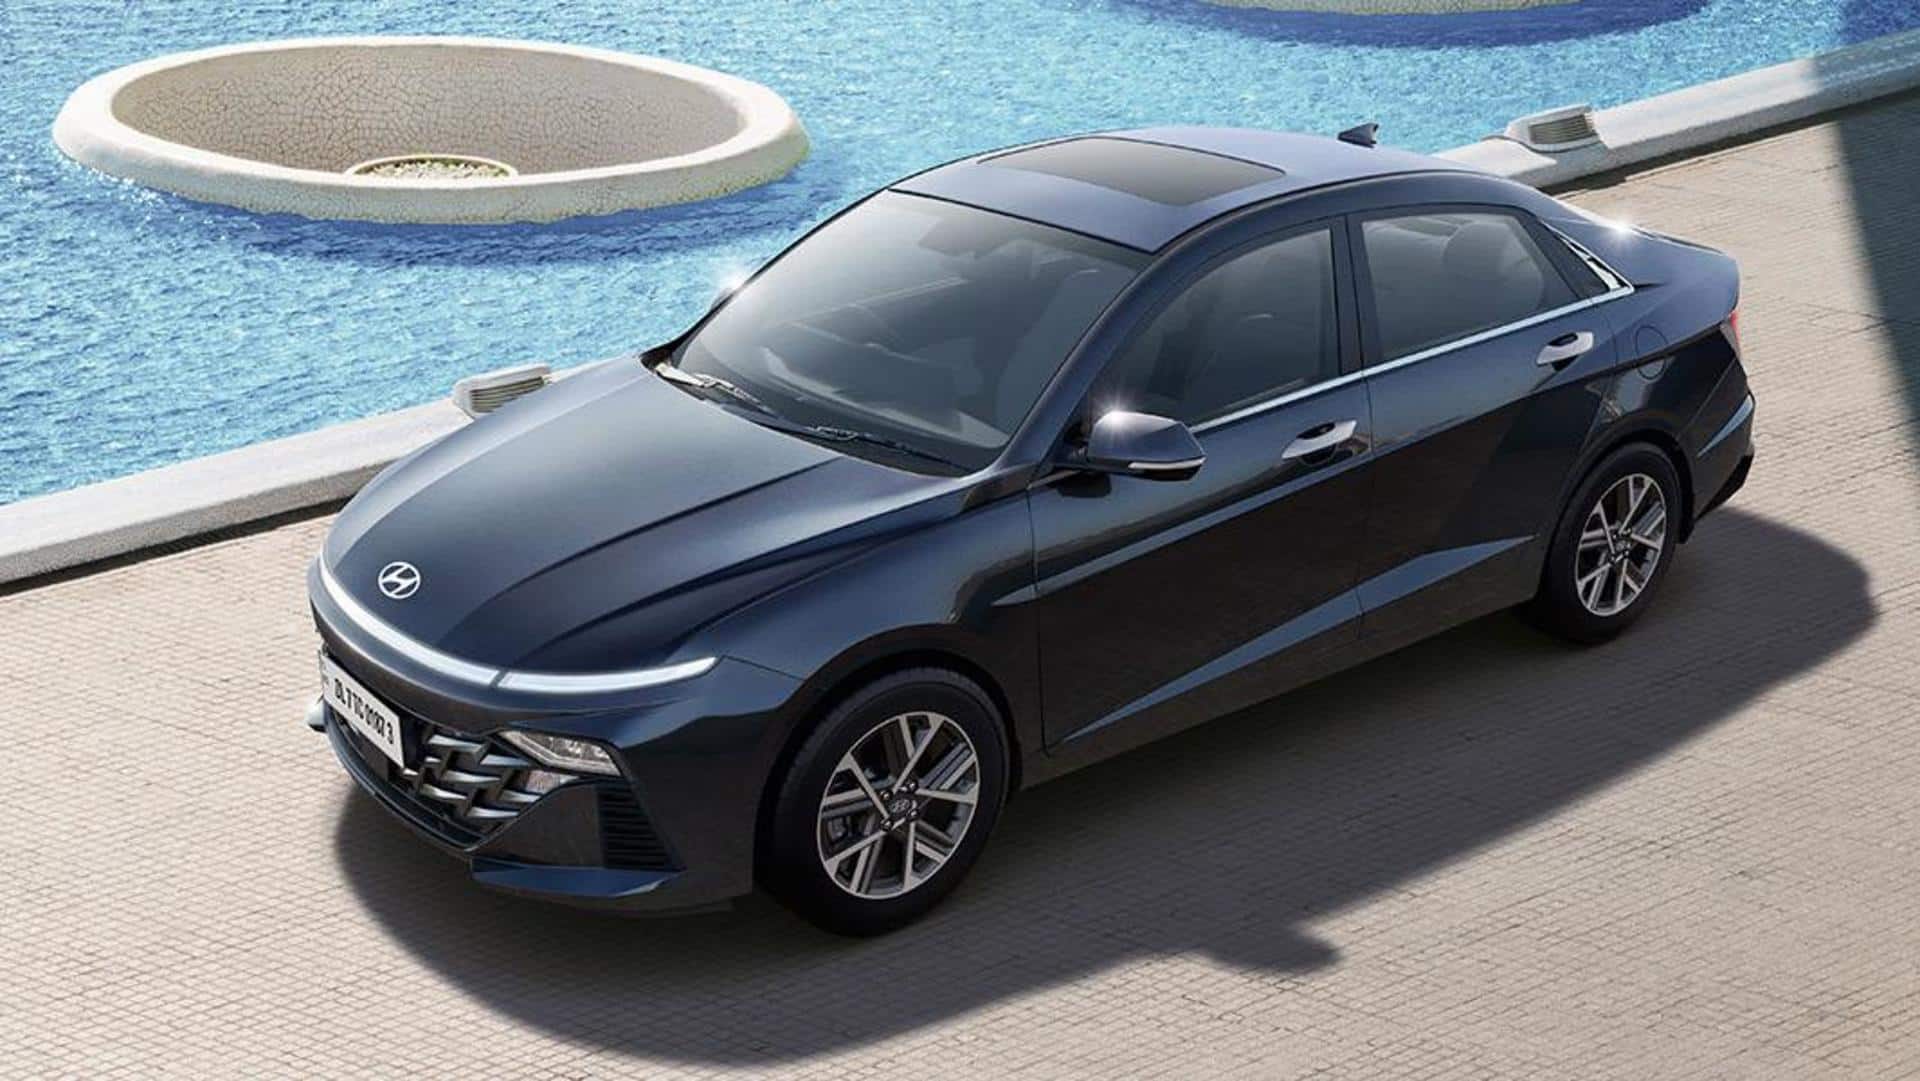 2023 Hyundai VERNA N Line found testing: What to expect